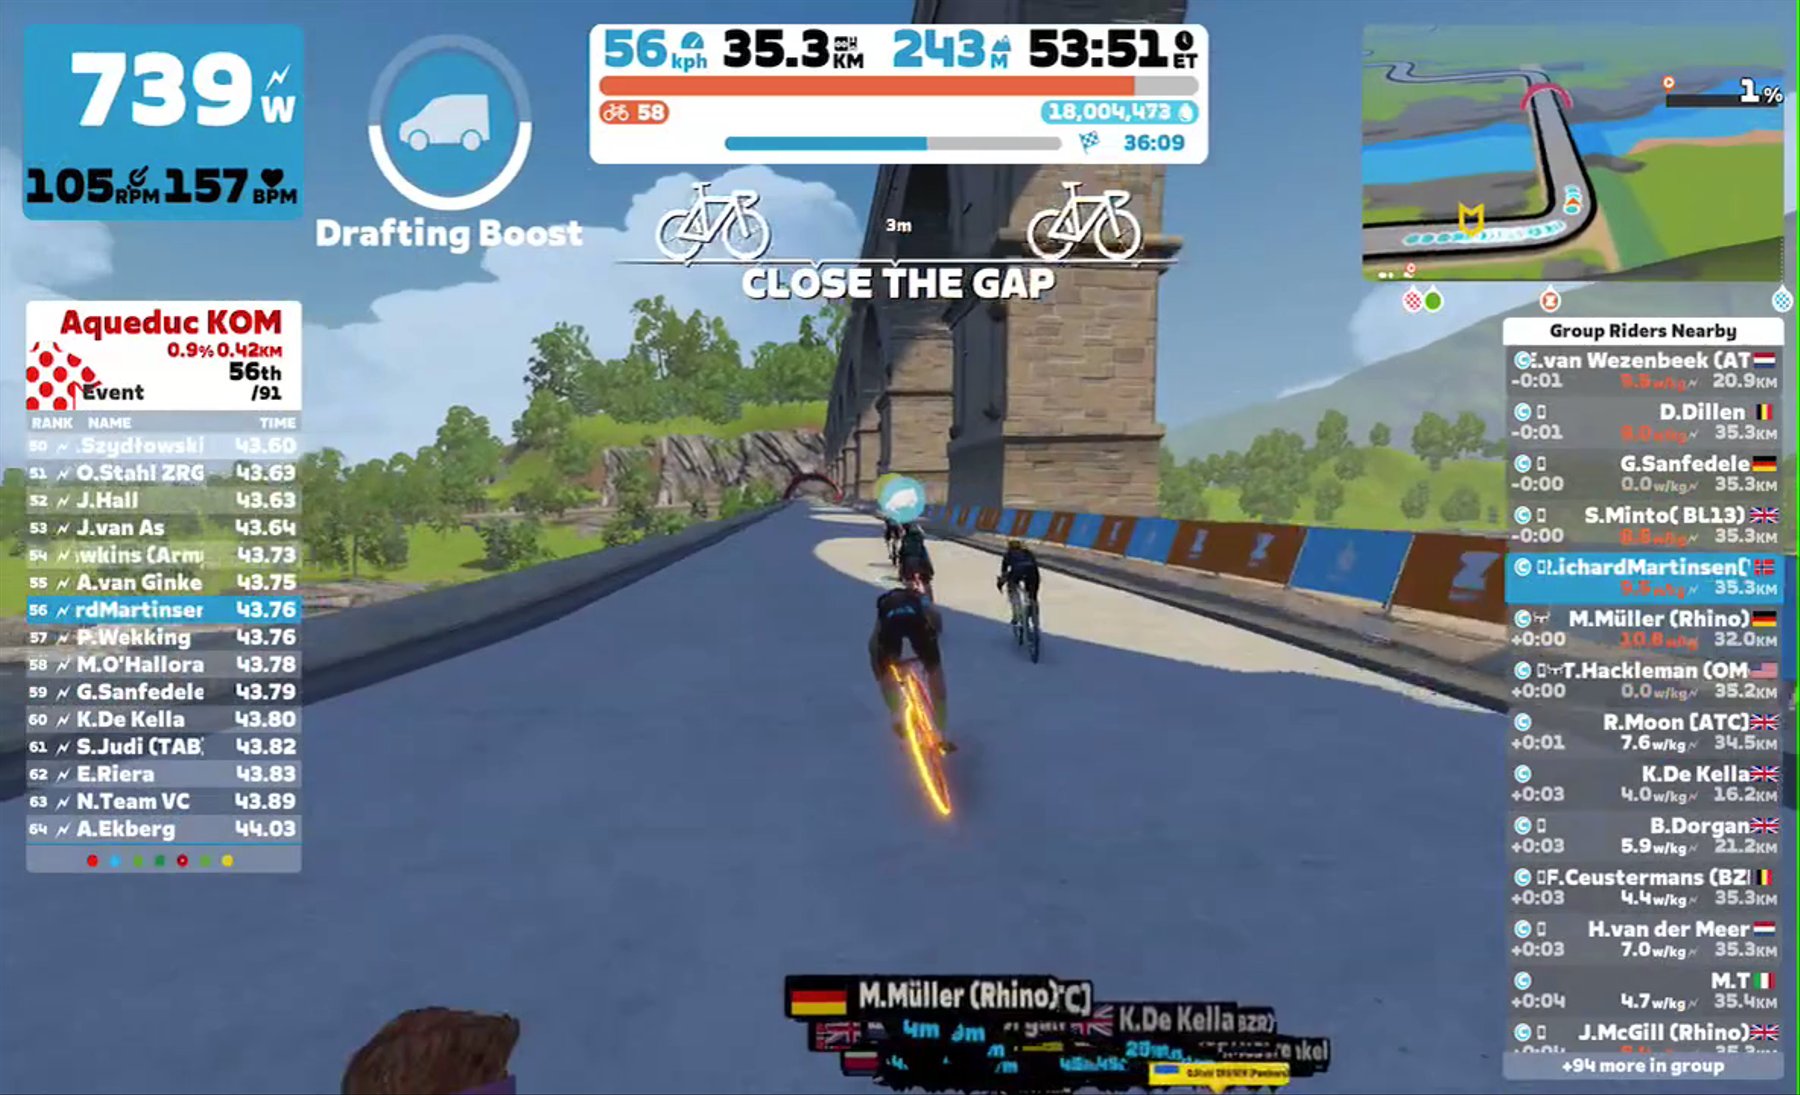 Zwift - Group Ride: ZRG-CC - Afterwork Ride (C) on Douce France in France